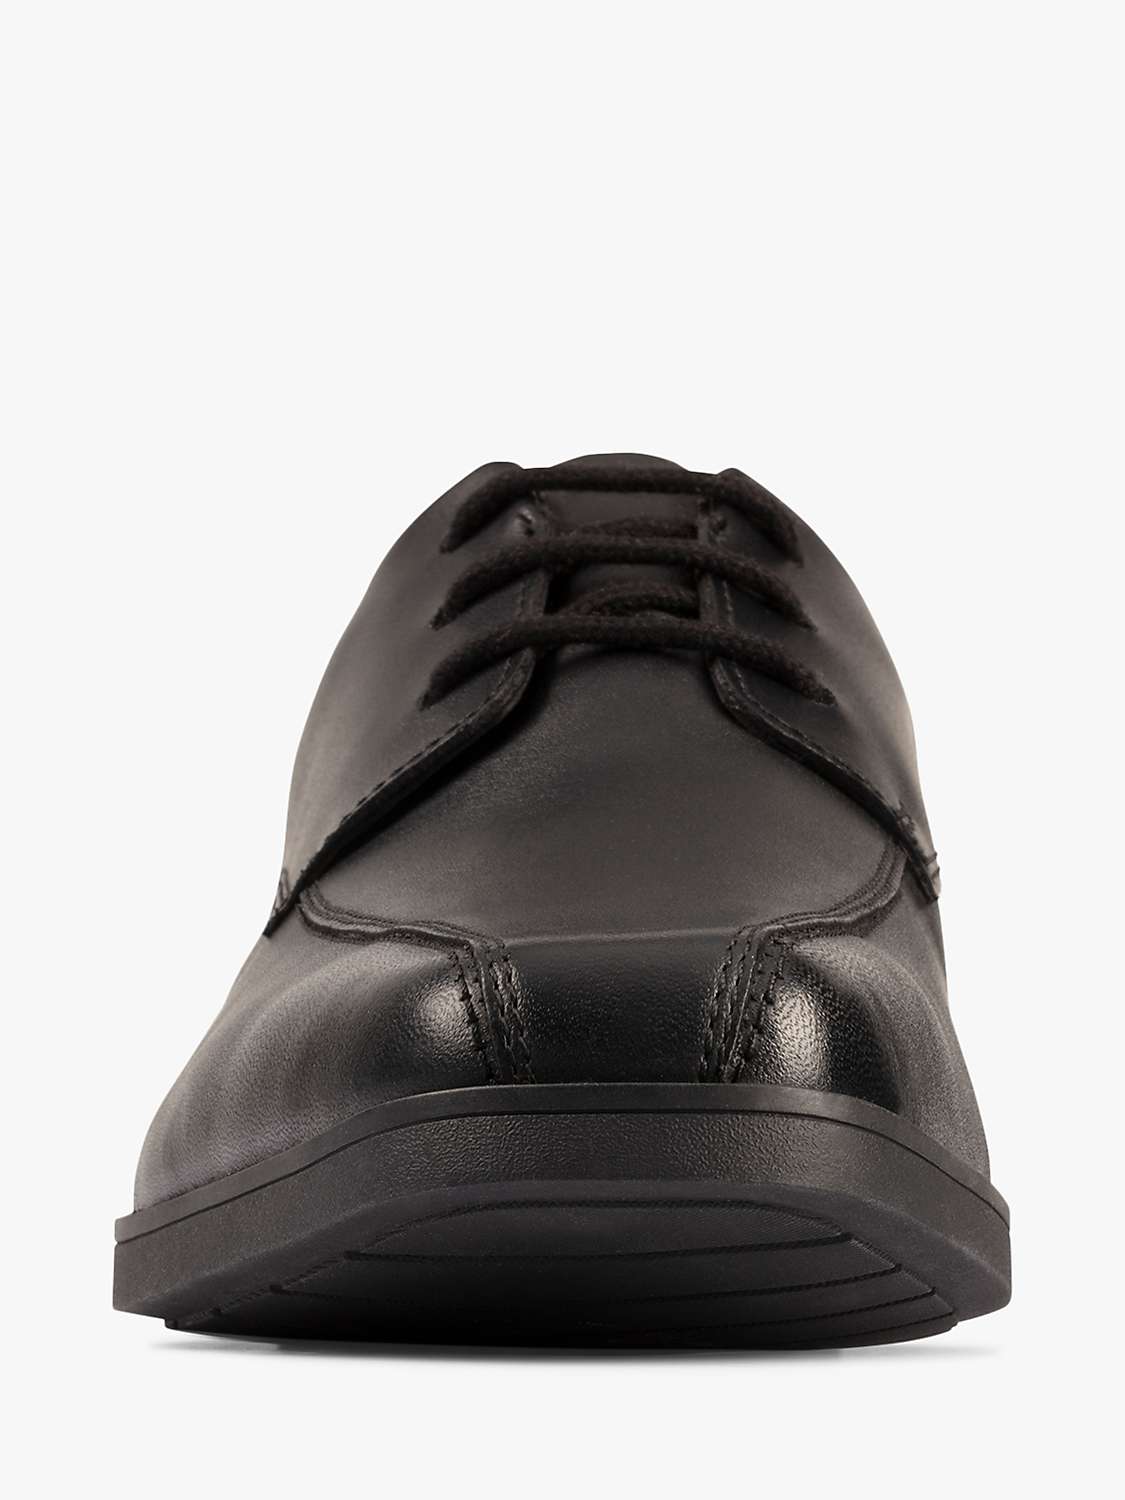 Buy Clarks Children's Scala Loop Youth Shoes Online at johnlewis.com